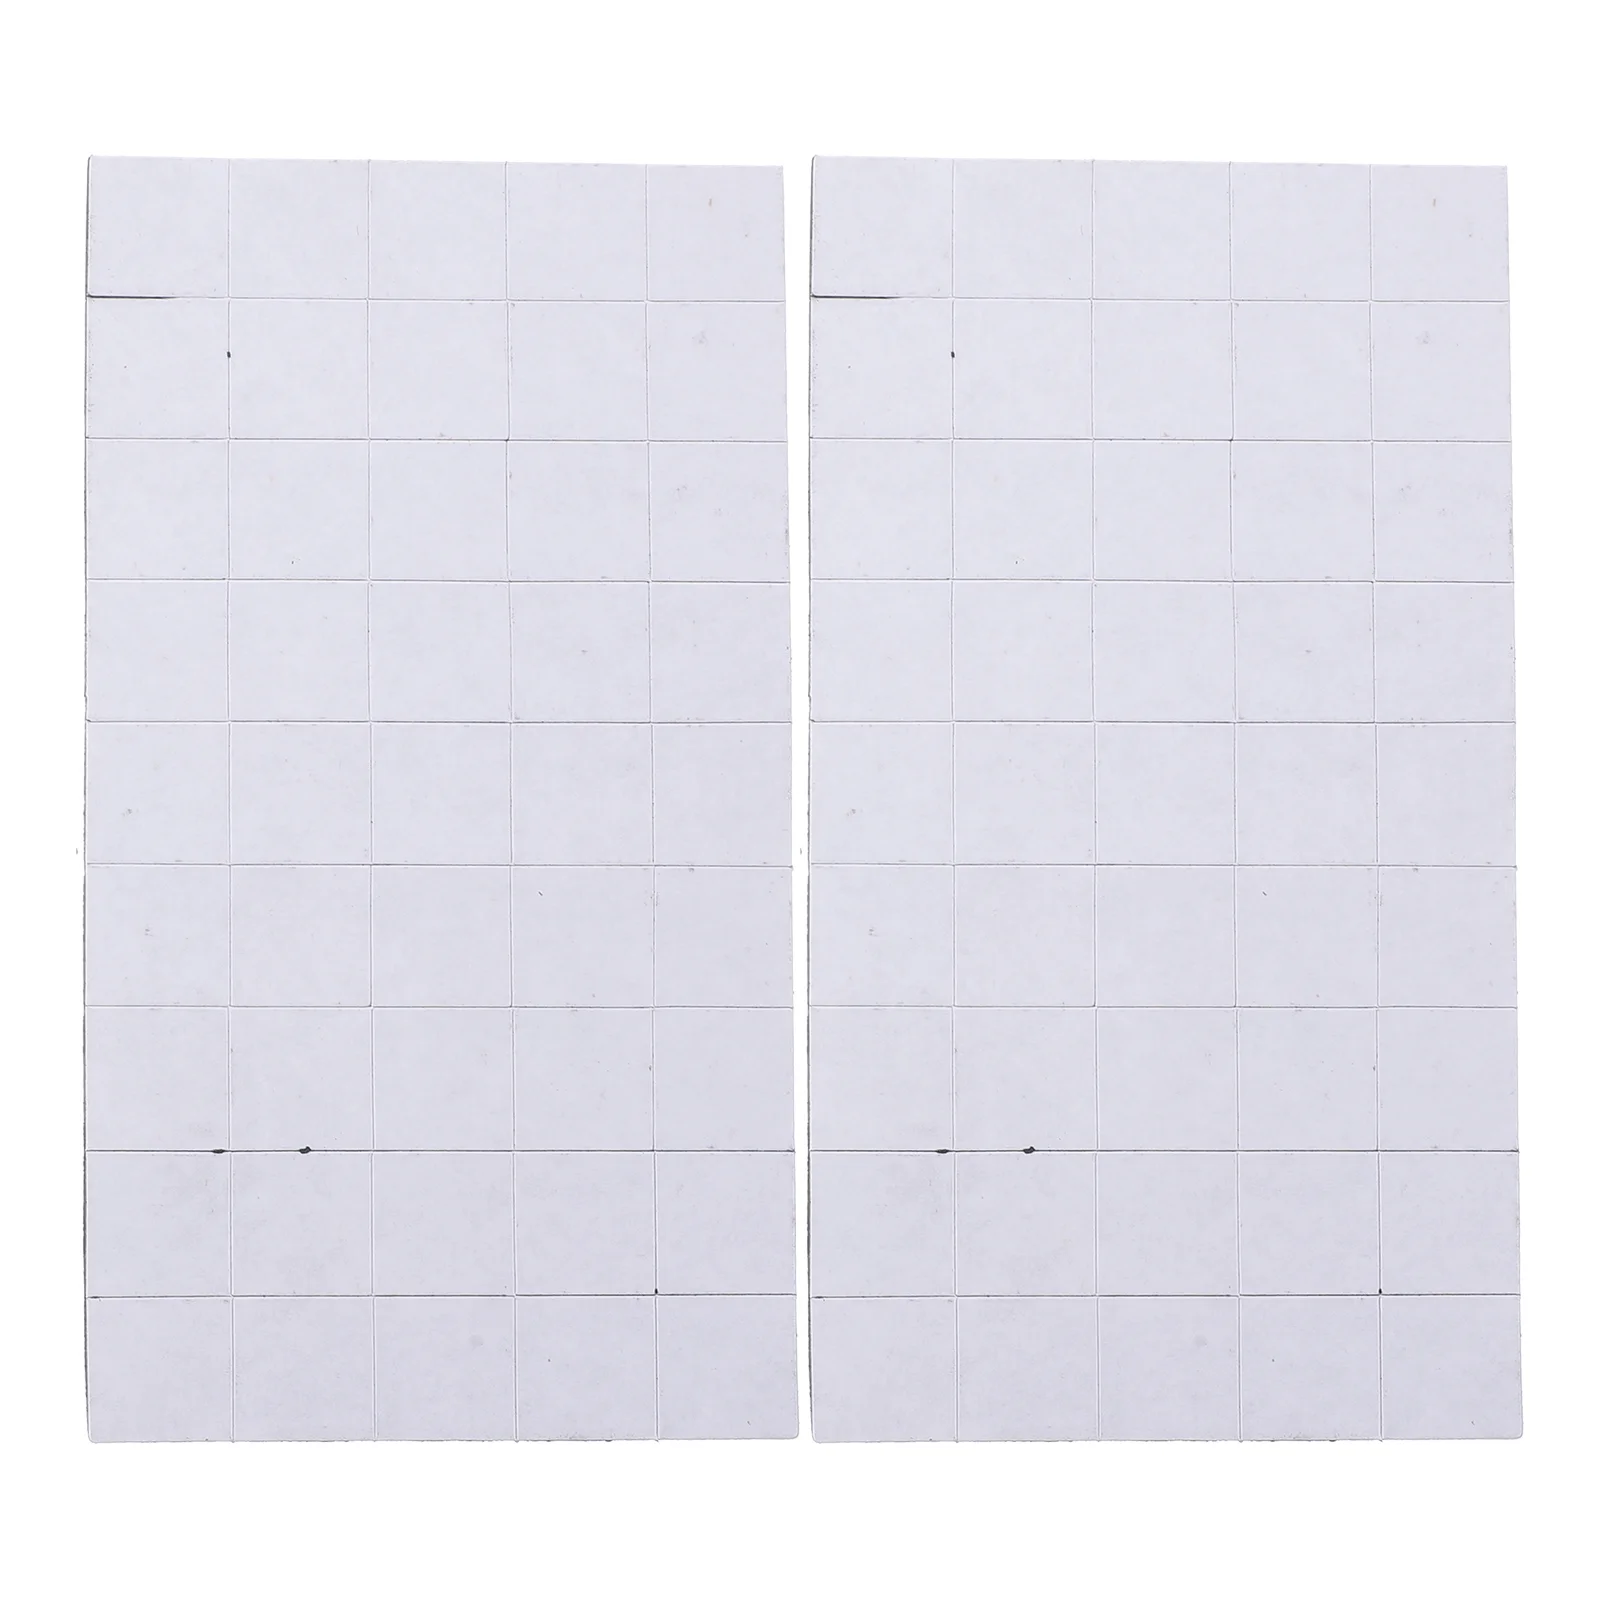 

90 Pcs Stickers Magnets Classroom Magnetic Borders Whiteboard Strips Adhesive Backing Square